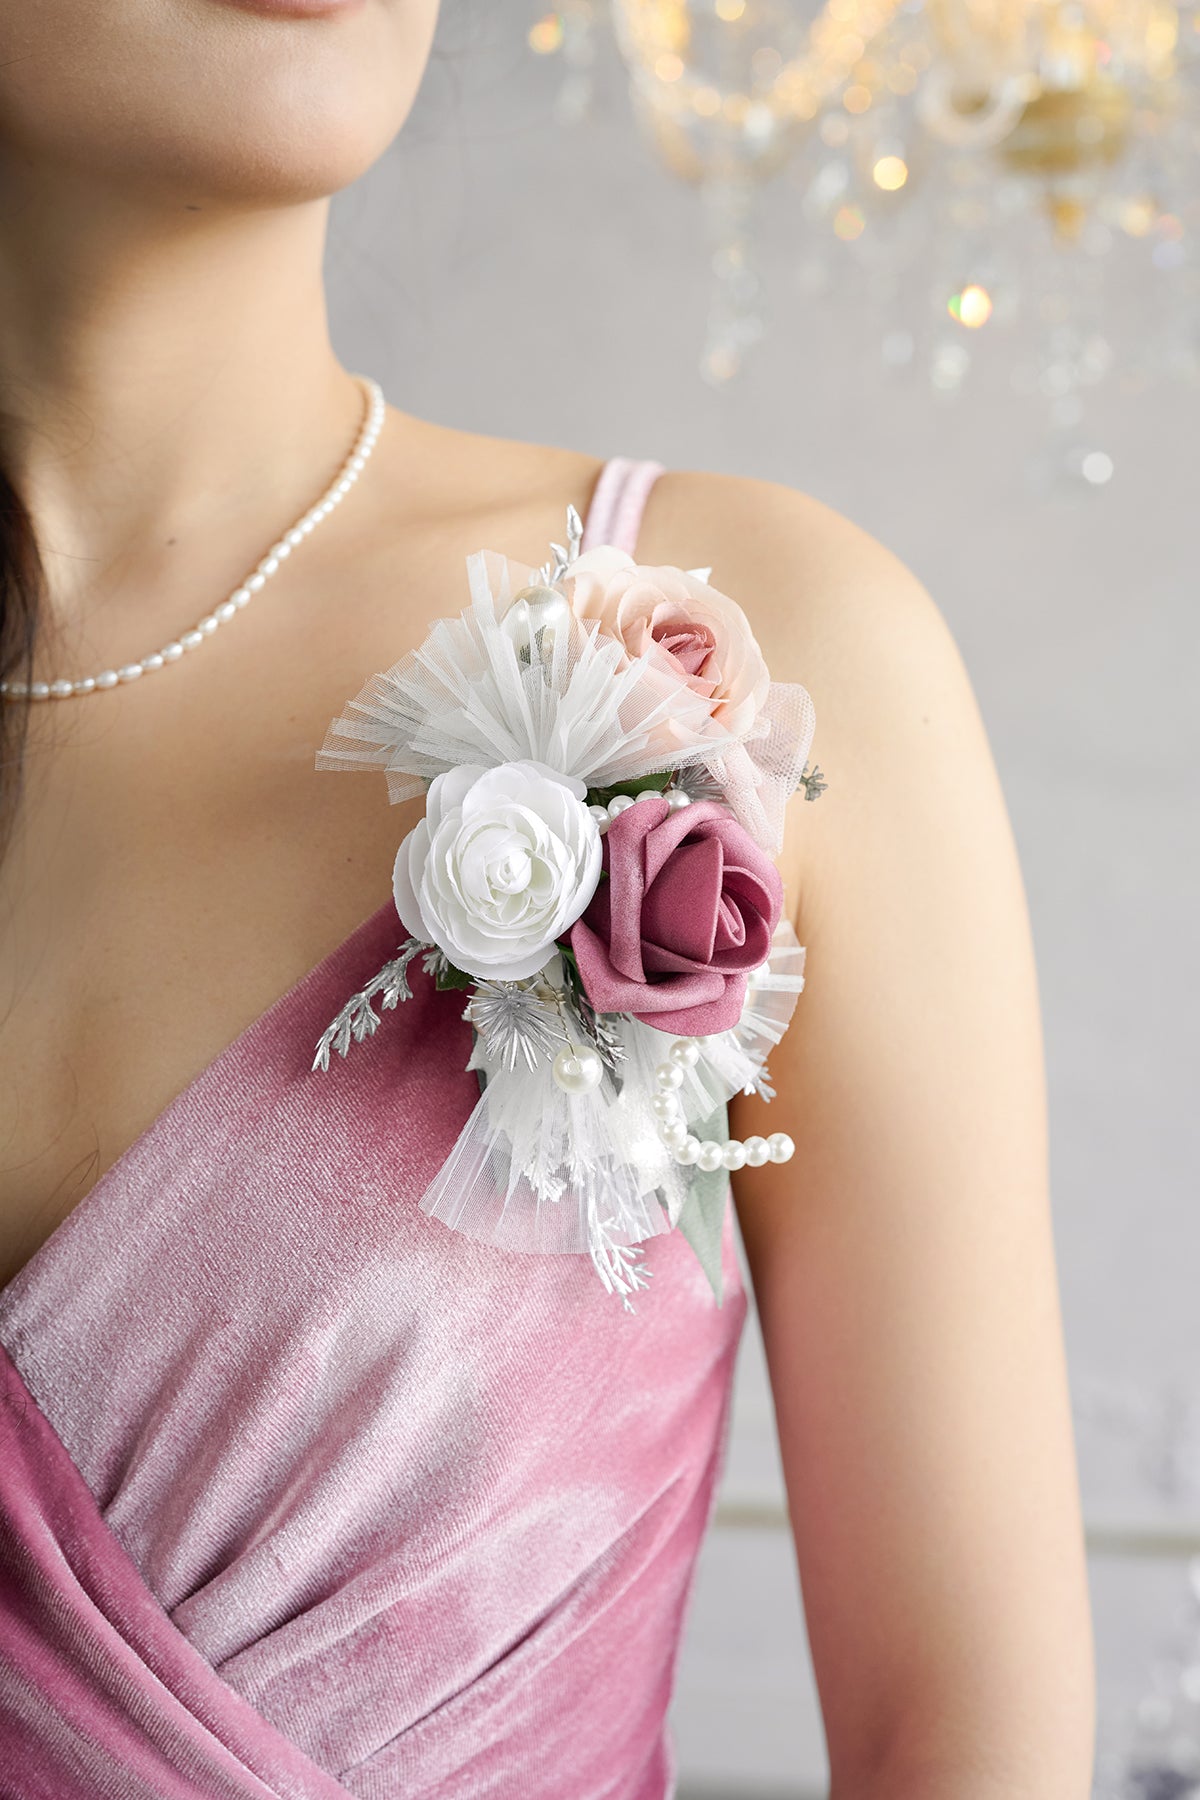 Wrist and Shoulder Corsages in Dusky Rose & Silver